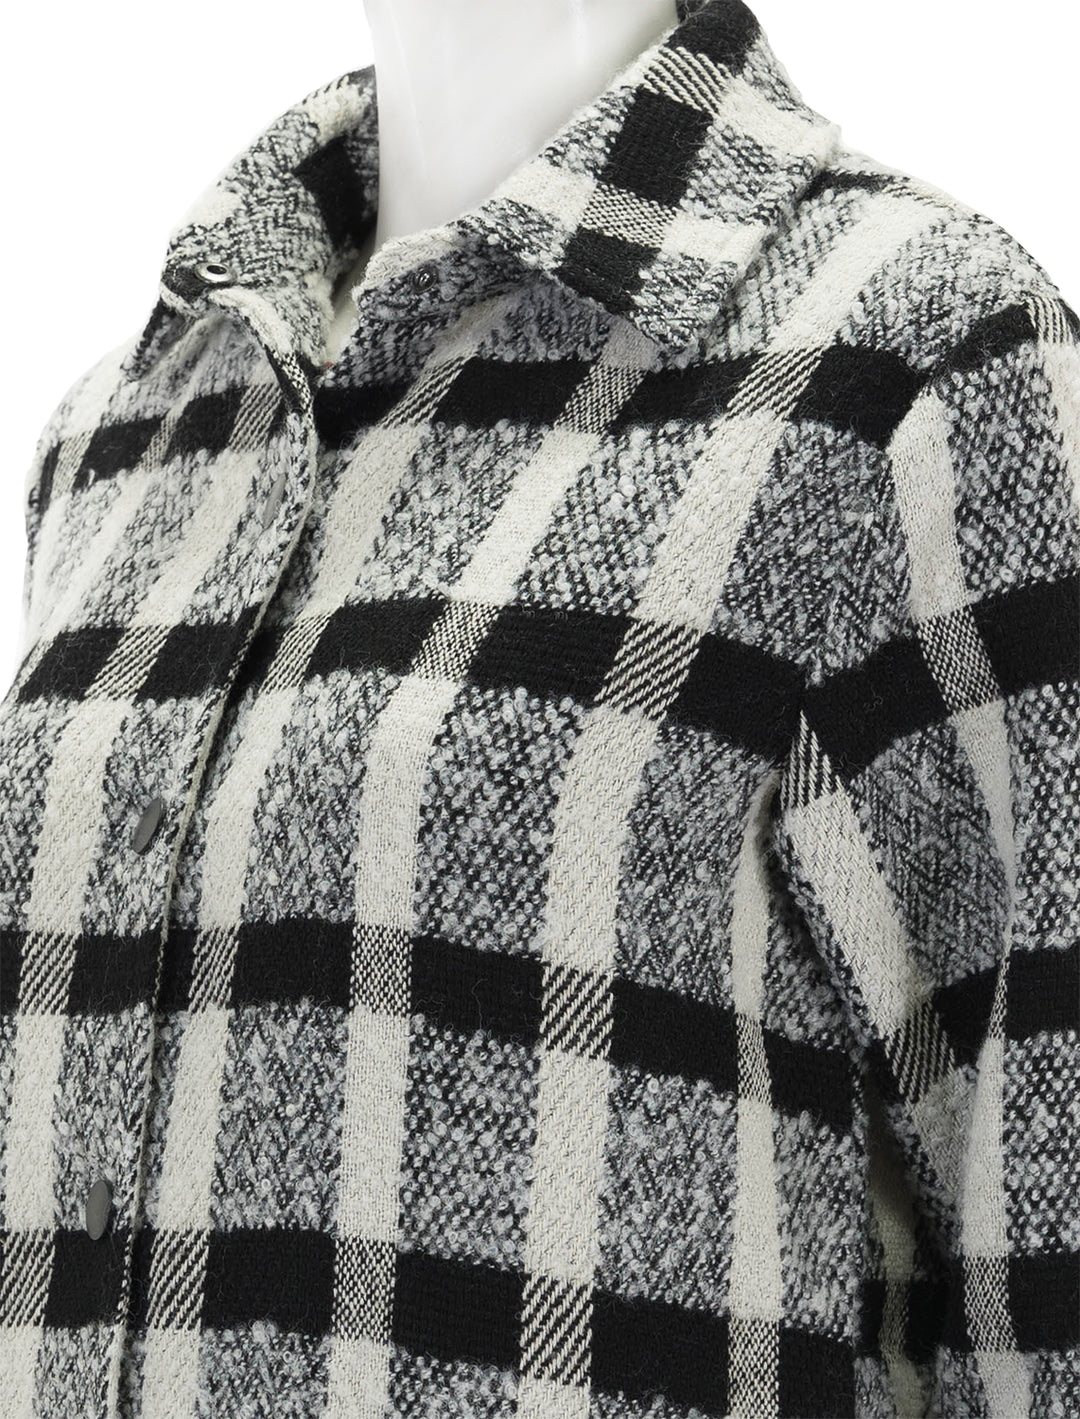 Close-up view of Steve Madden's eldridge shirt jacket in black and white plaid.